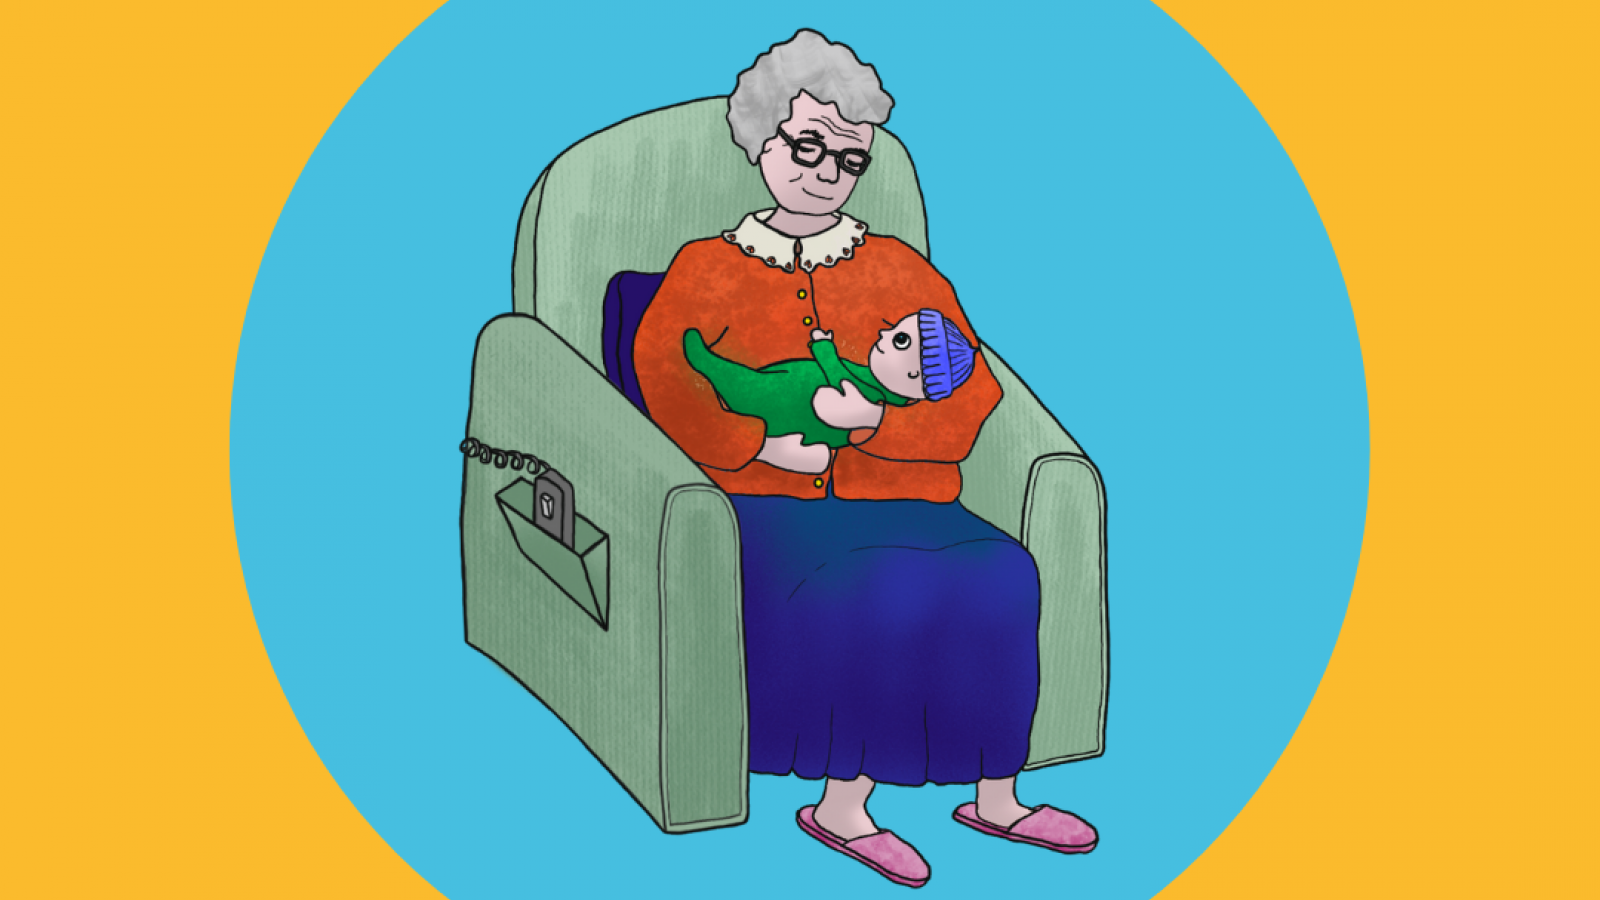 illustrations from the book Finding nana - an older lady sat in an armchair holding a baby